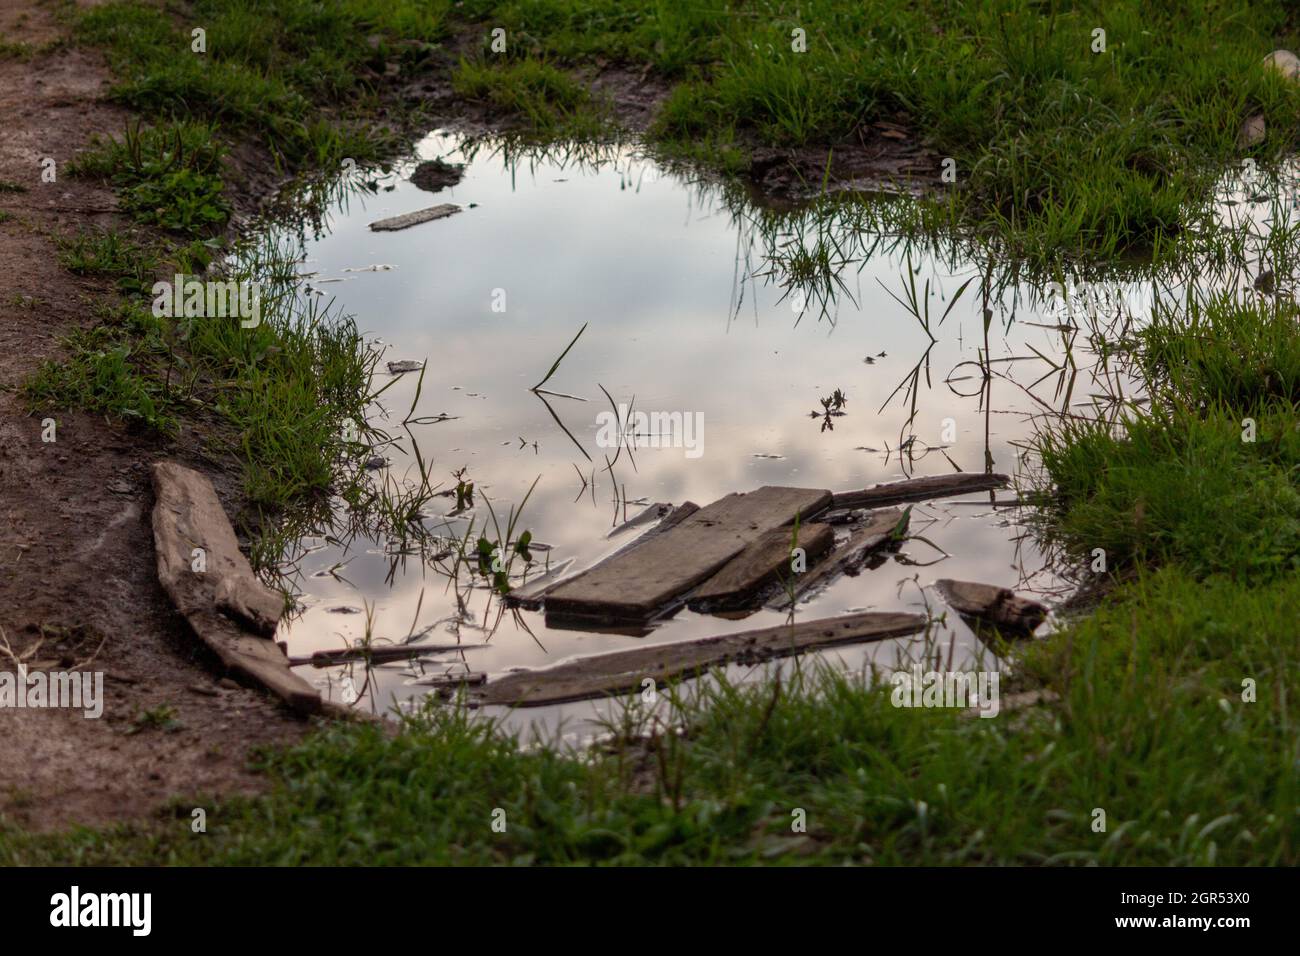 Image*After : photos : swamp mud muddy water reflection swampy grass growing